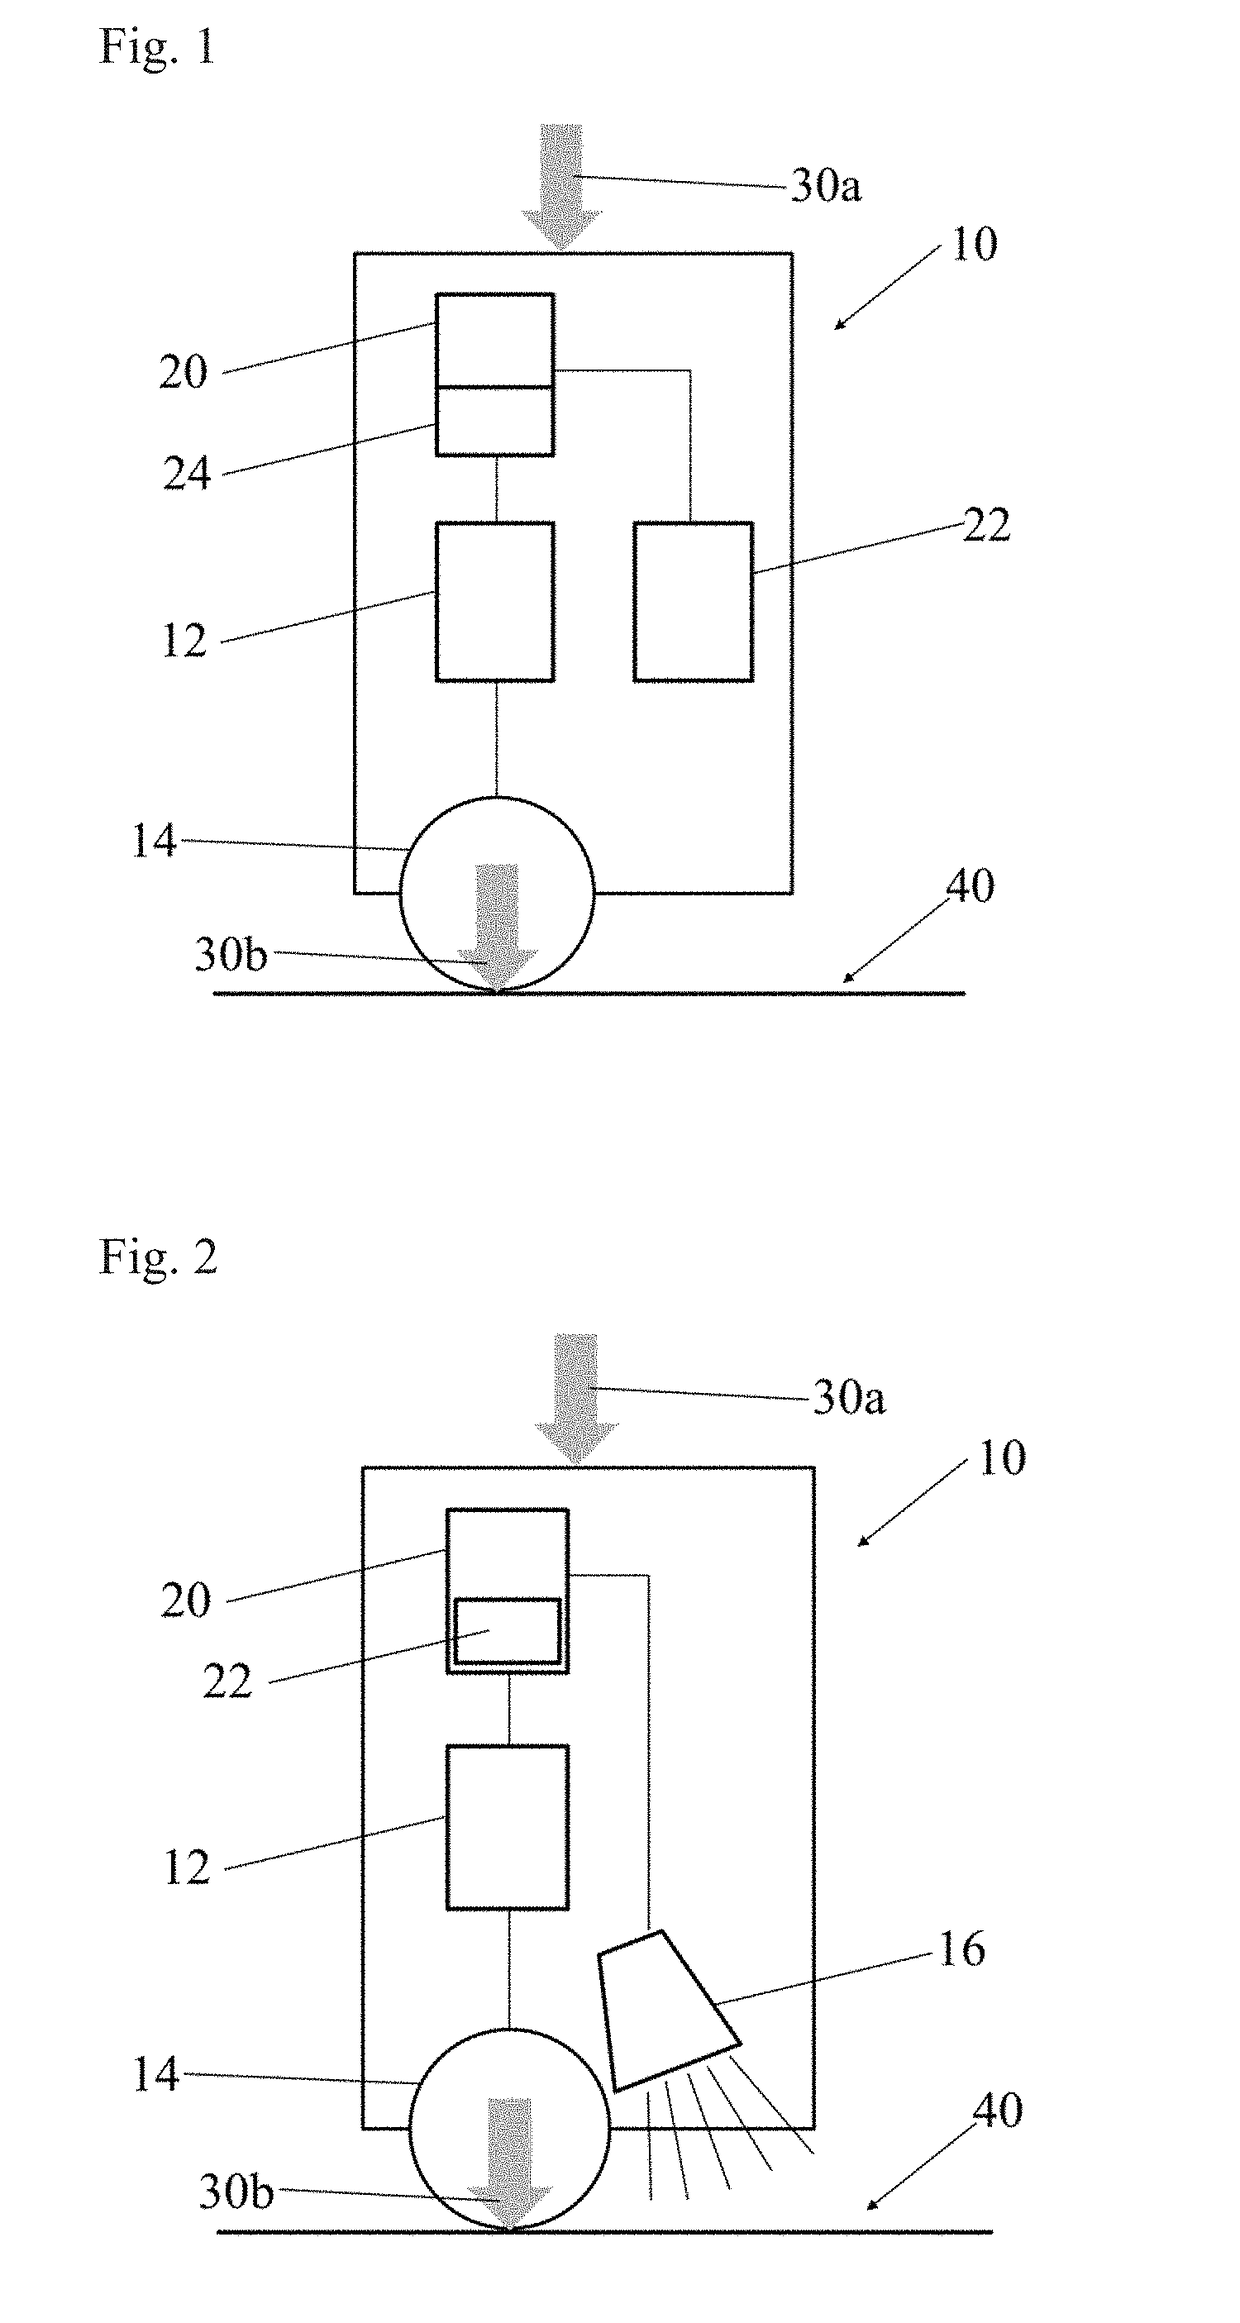 Epilation device measuring contact force and comprising a feedback unit